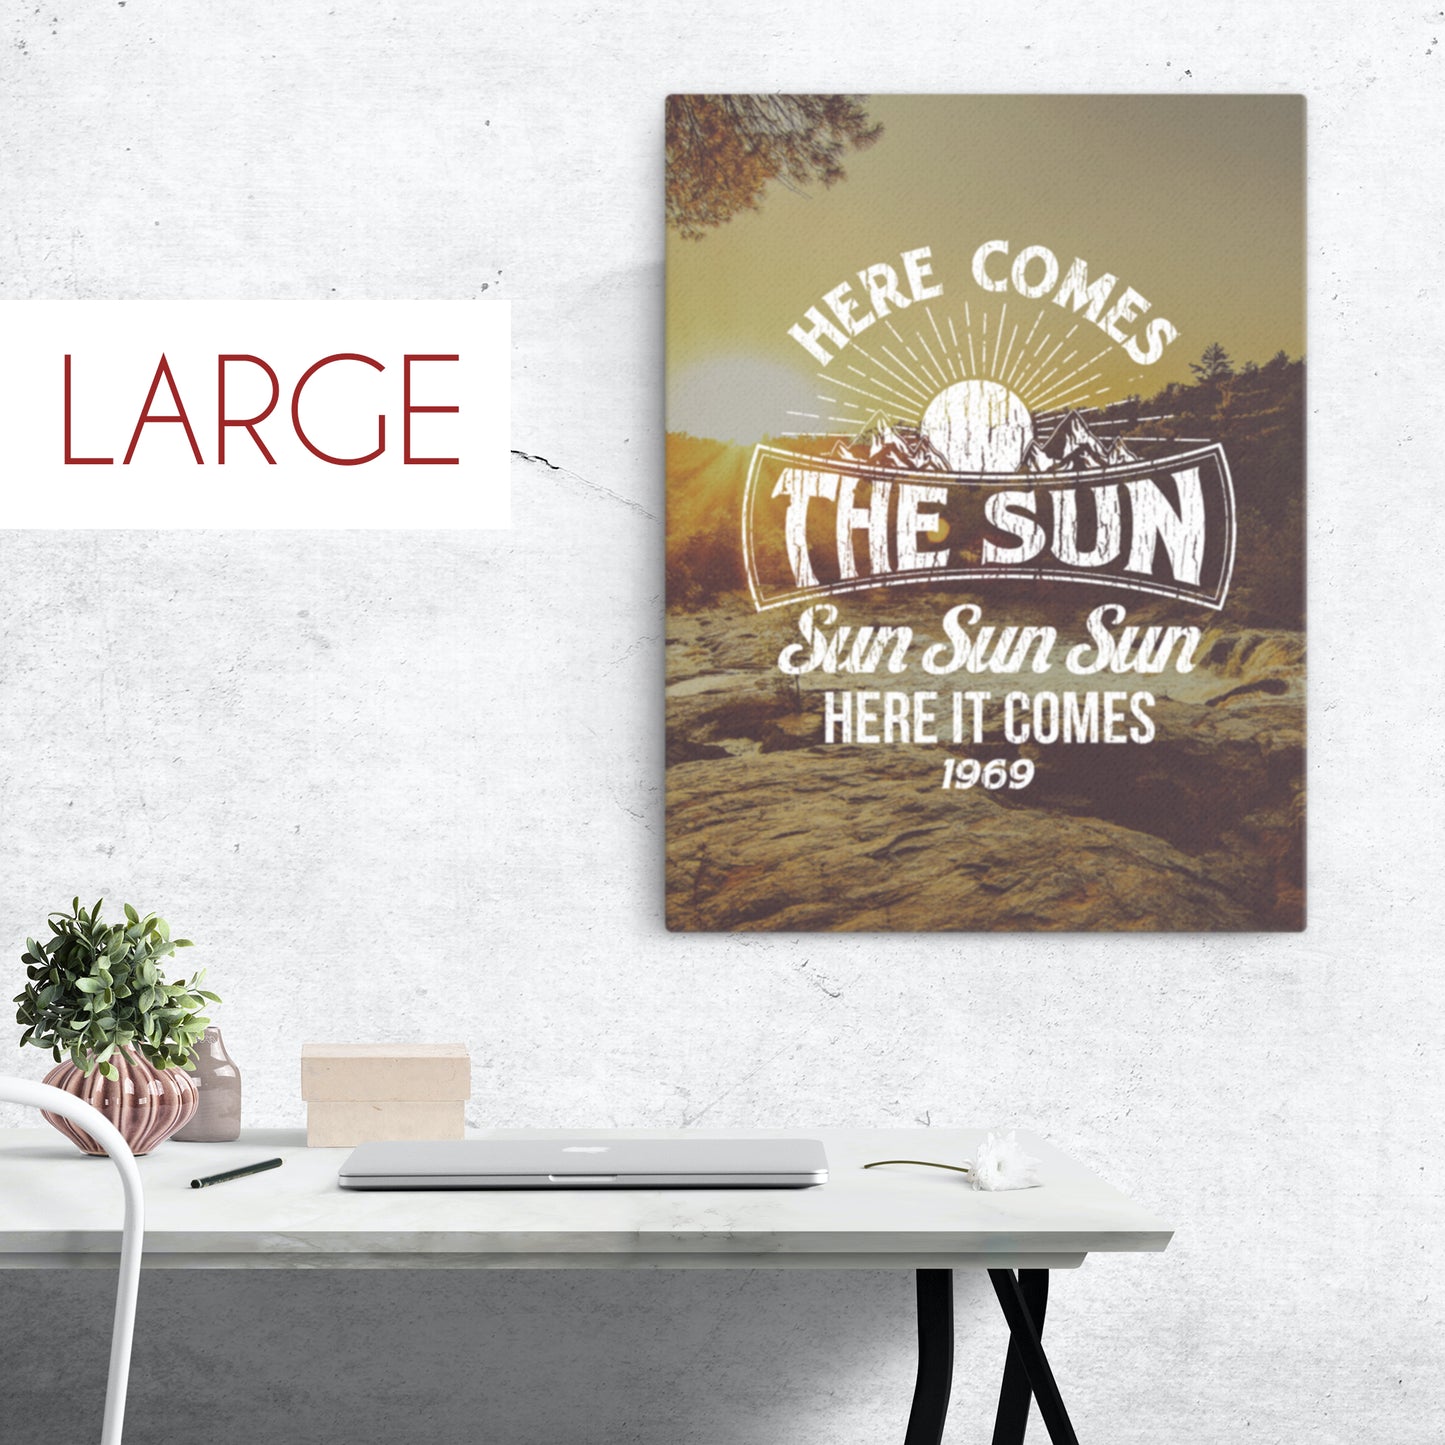 The Beatles - Here Comes The Sun - Large Canvas